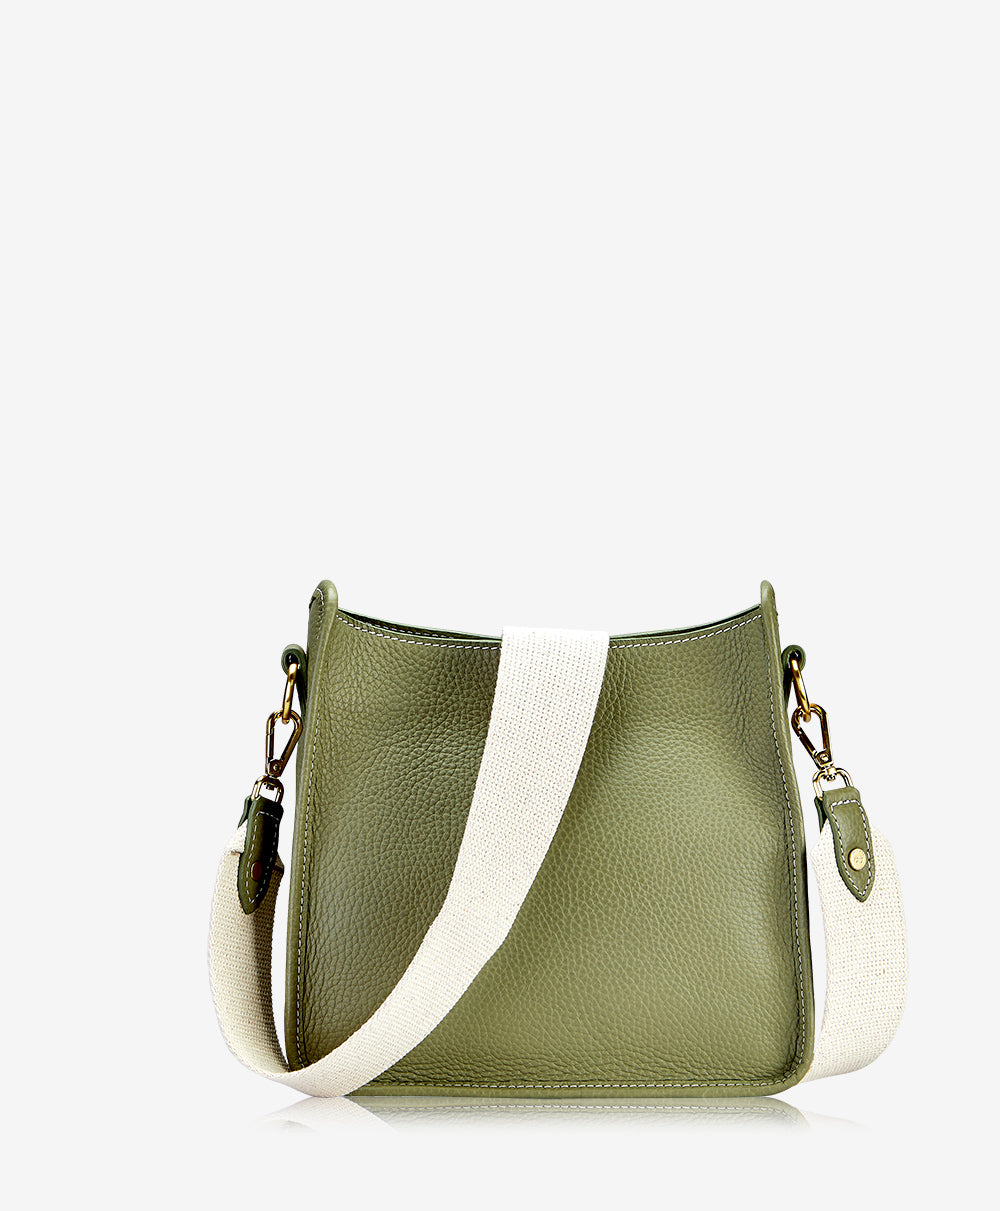 Coach Vintage Legacy USA Leather Crossbody Bag in Lime Green